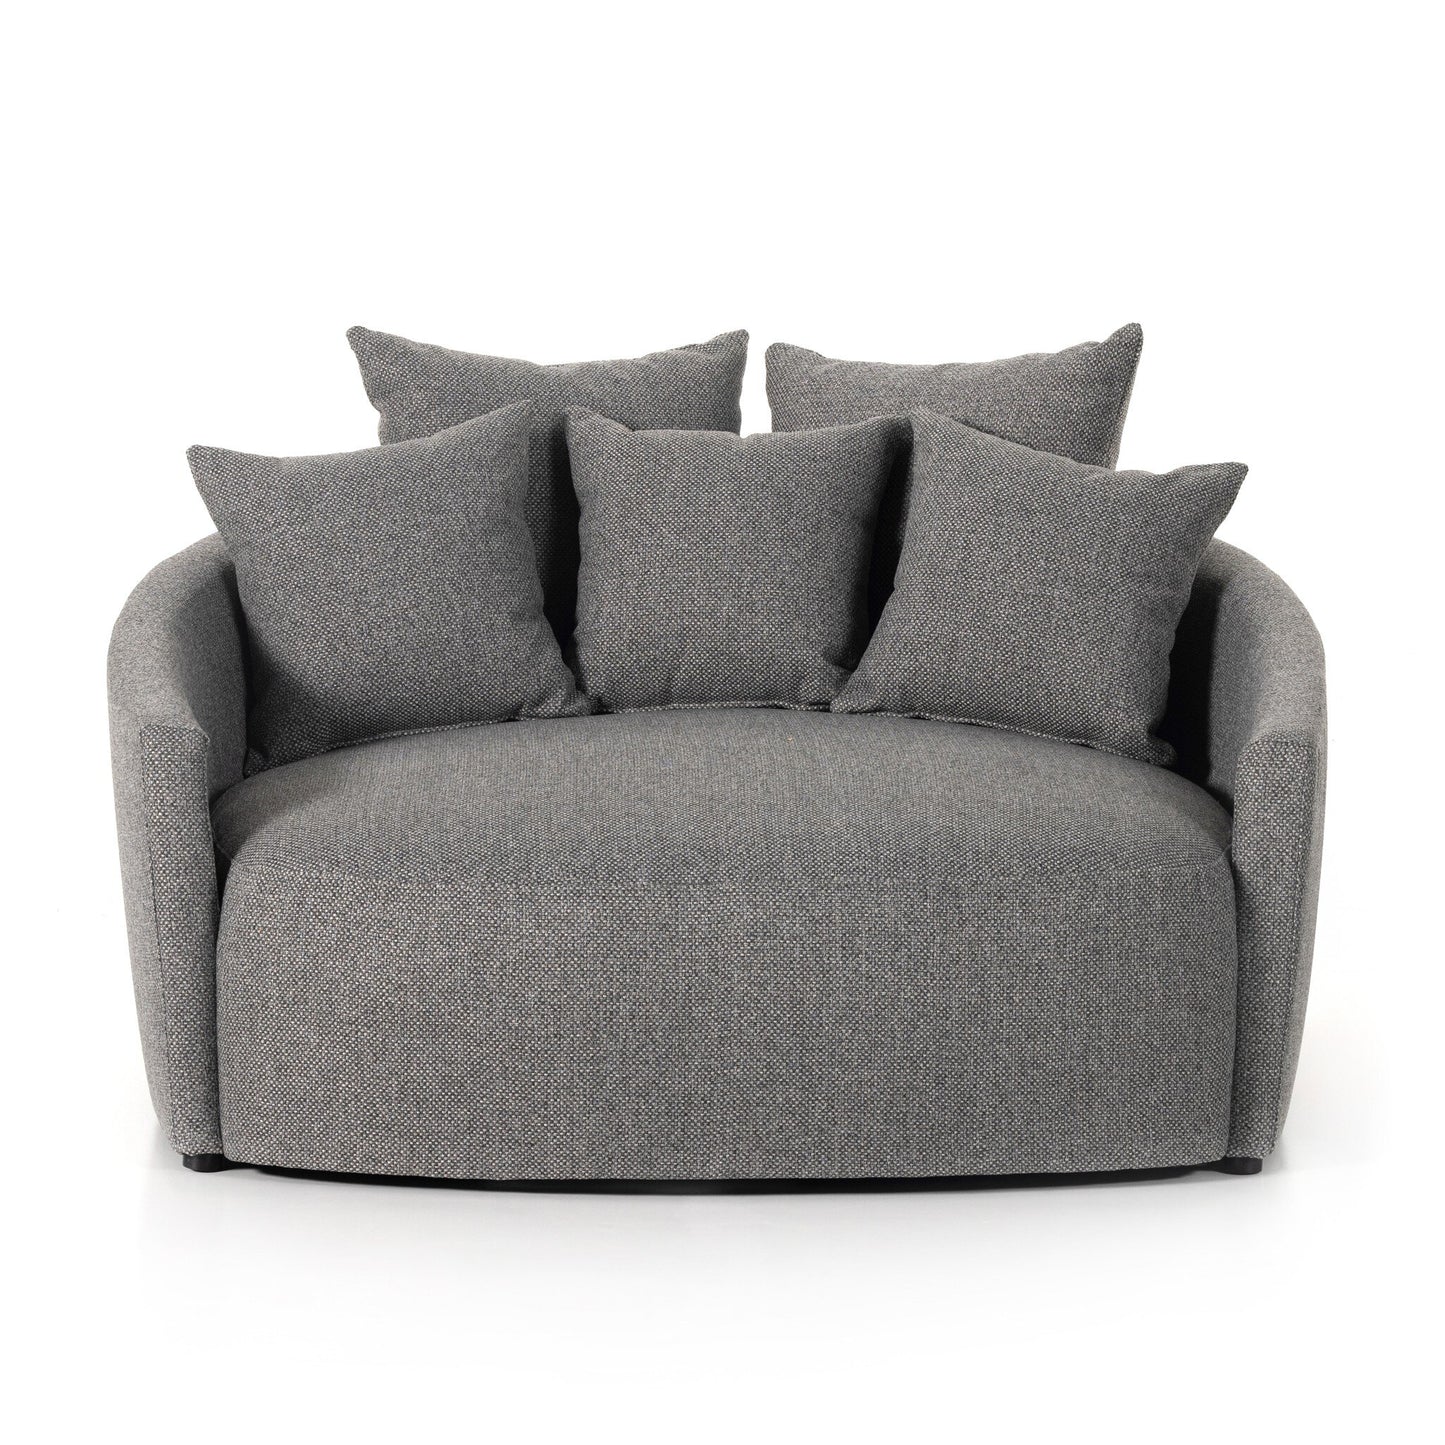 Cleo Media Lounger- Charcoal